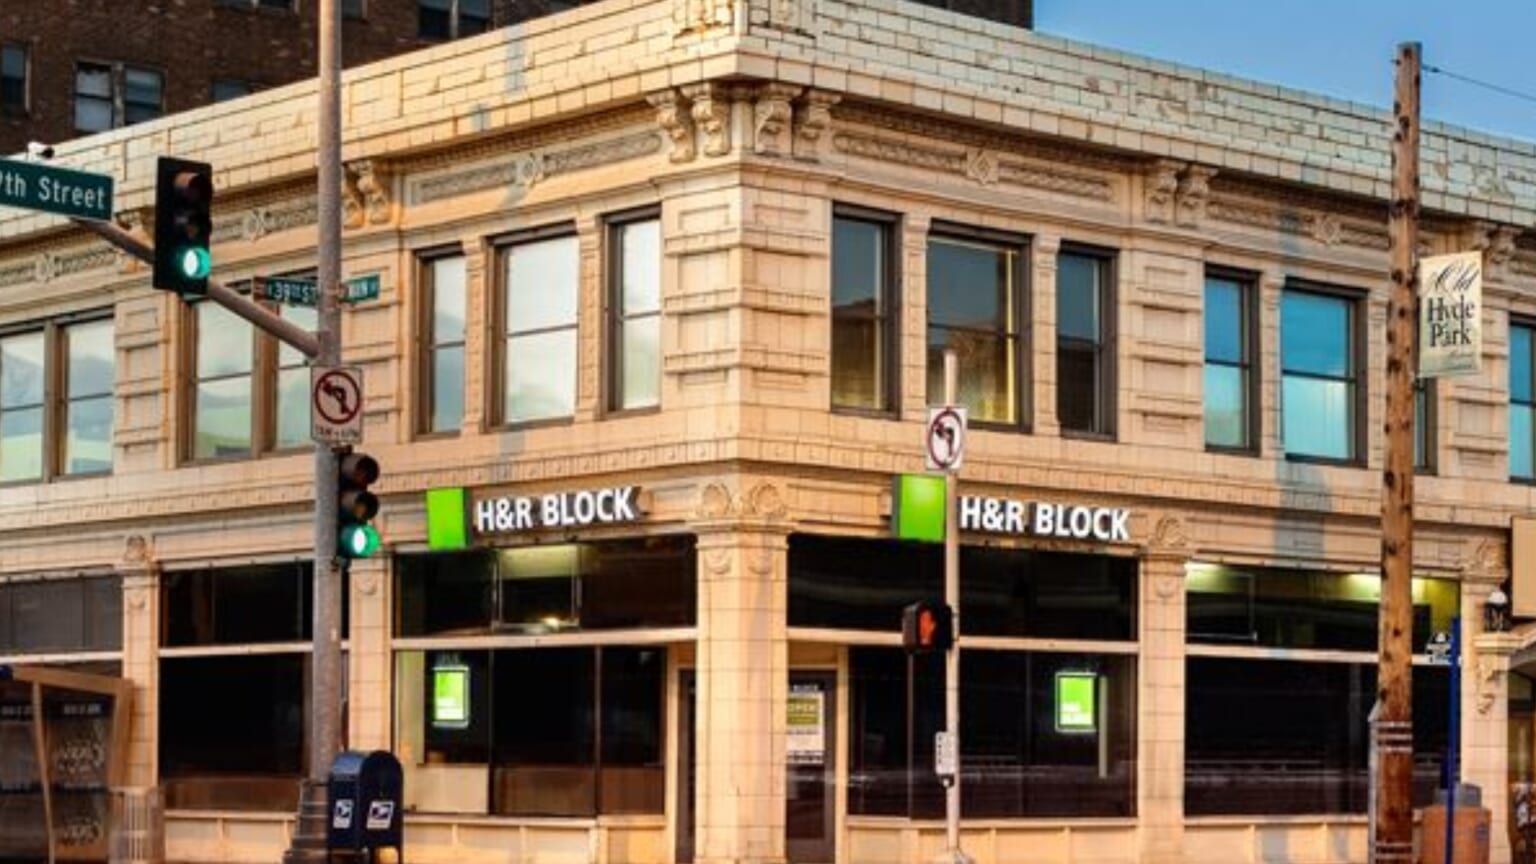 H&R Block acknowledges stimulus mixup, vows payments are coming soon